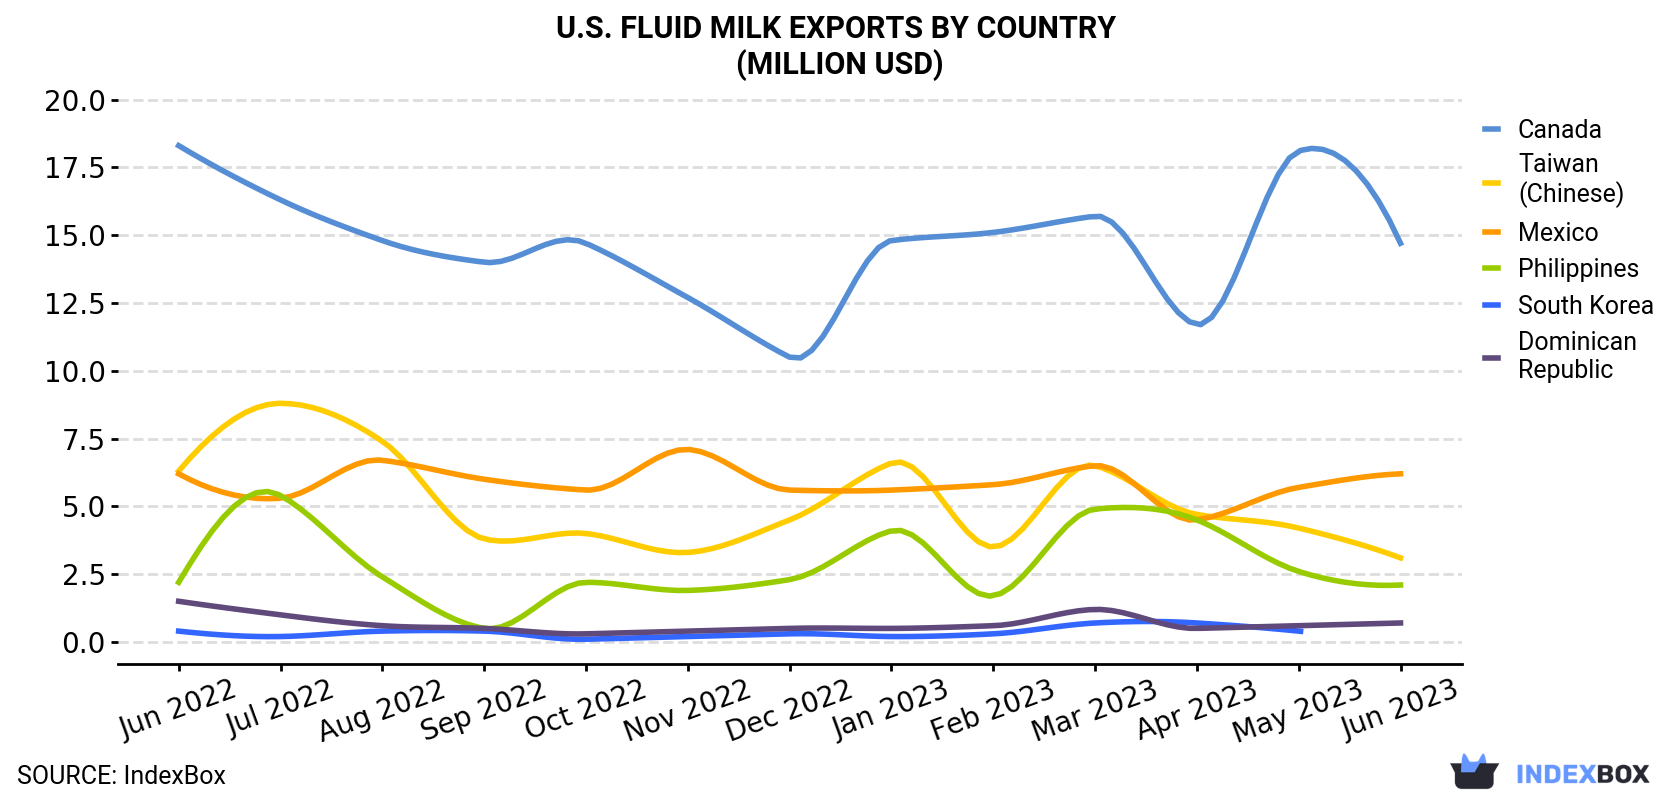 U.S. Fluid Milk Exports By Country (Million USD)